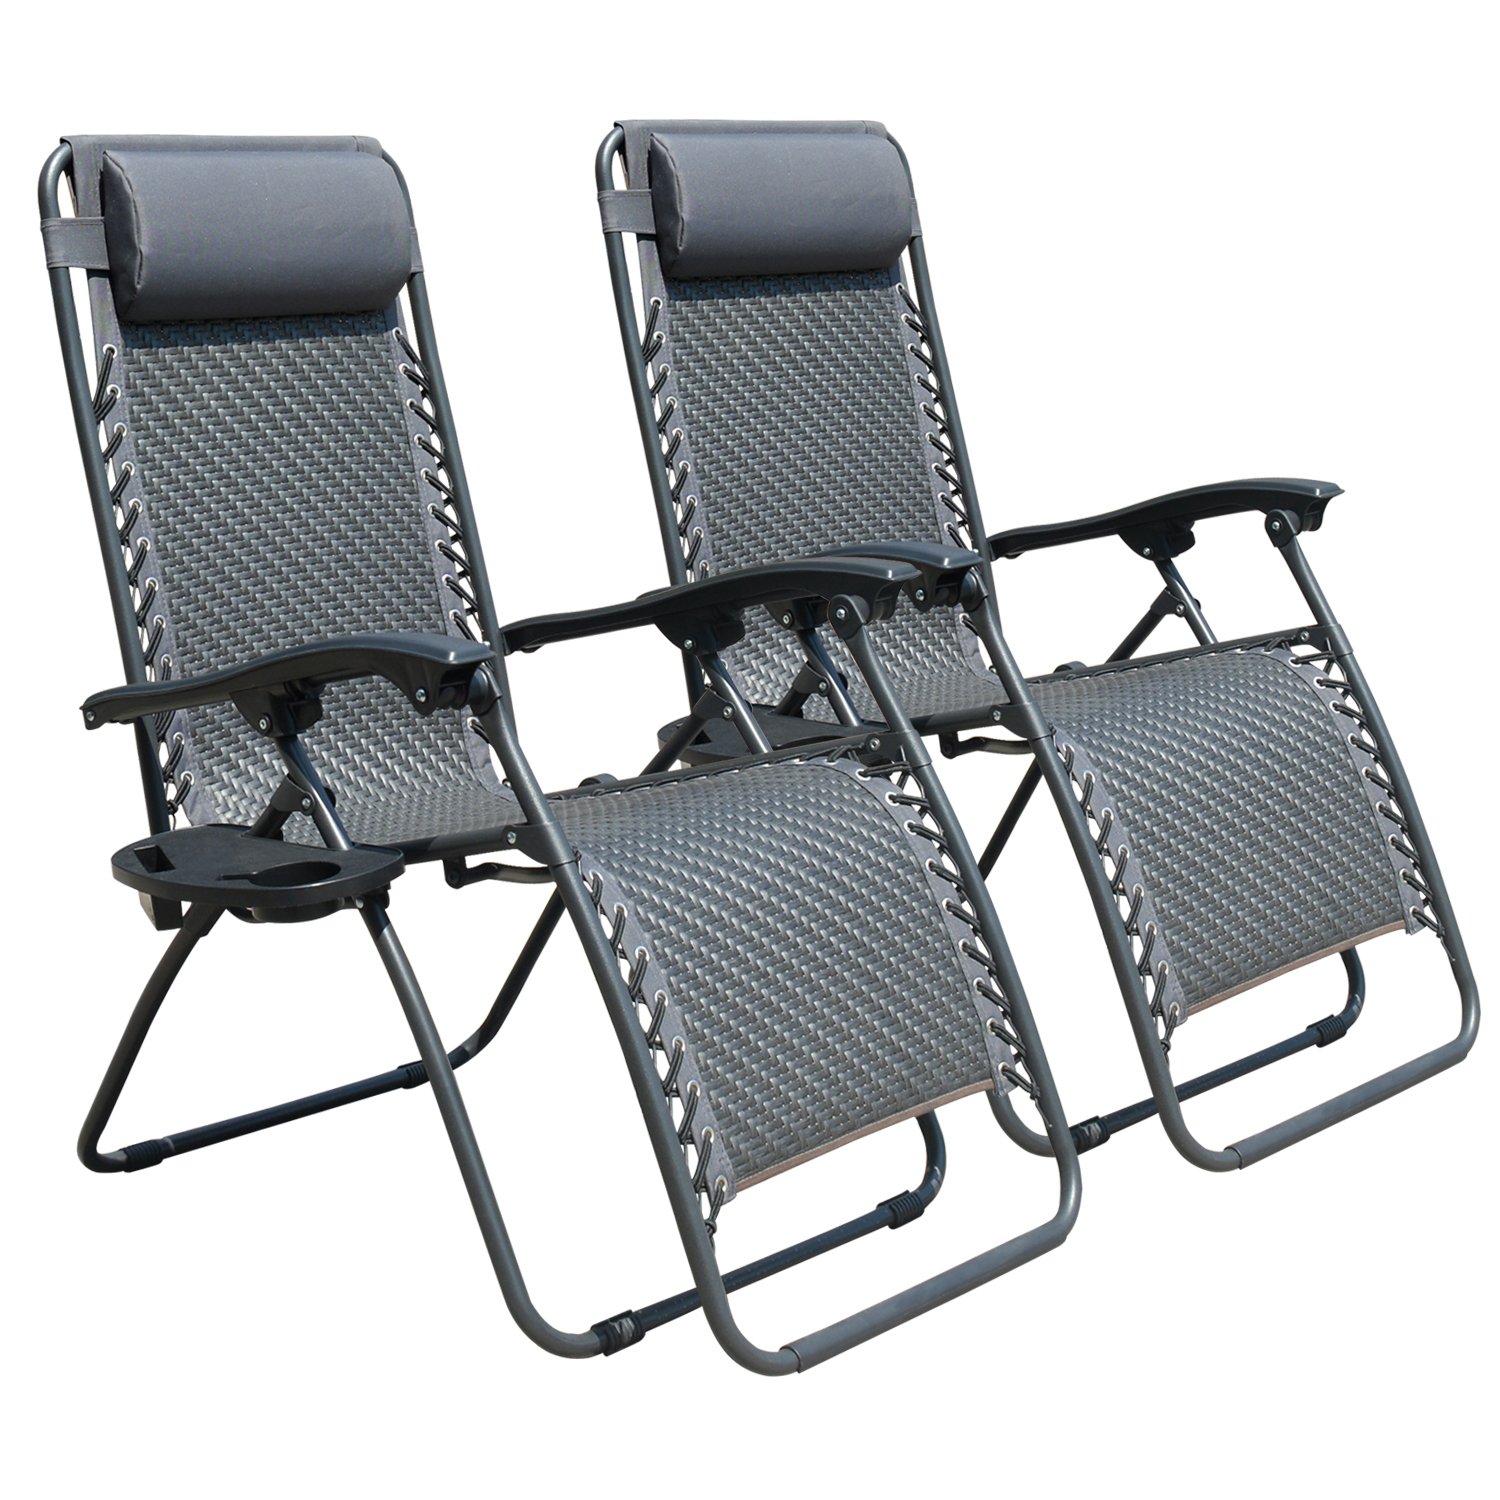 Casainc Gray Patio Metal and Wicker Outdoor Recliner with Holding Tray (2-Pack)-CASAINC